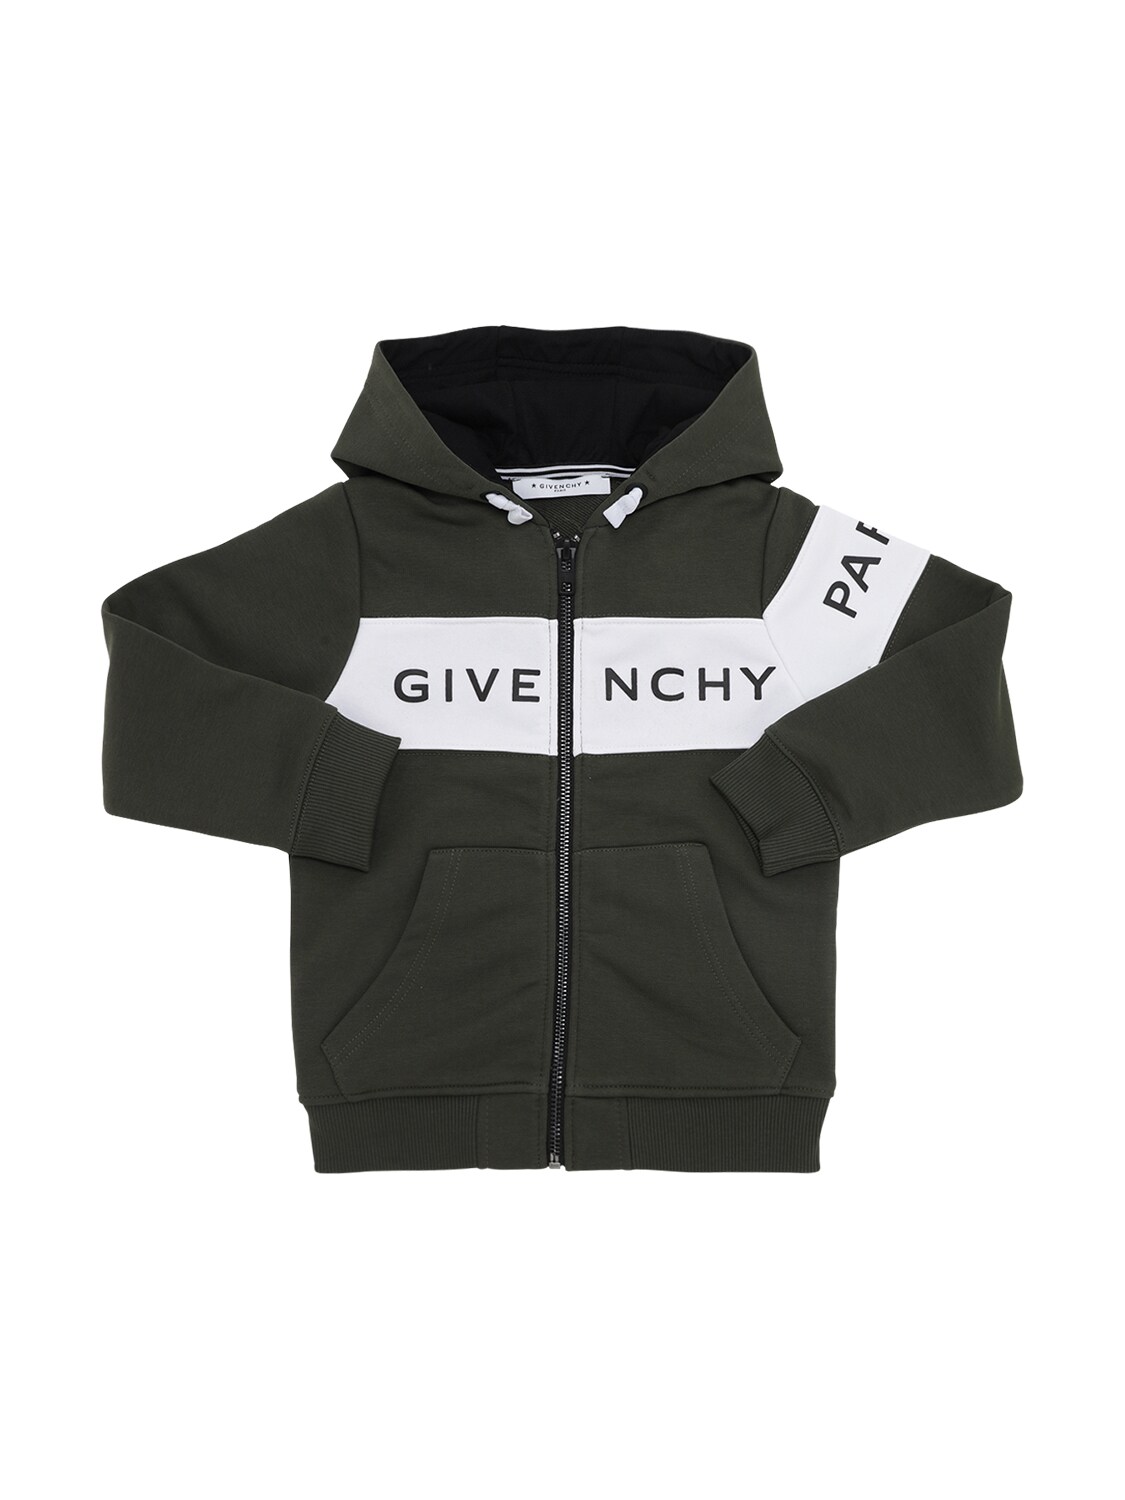 Givenchy Kids' Zip-up Cotton Sweatshirt Hoodie In Military Green